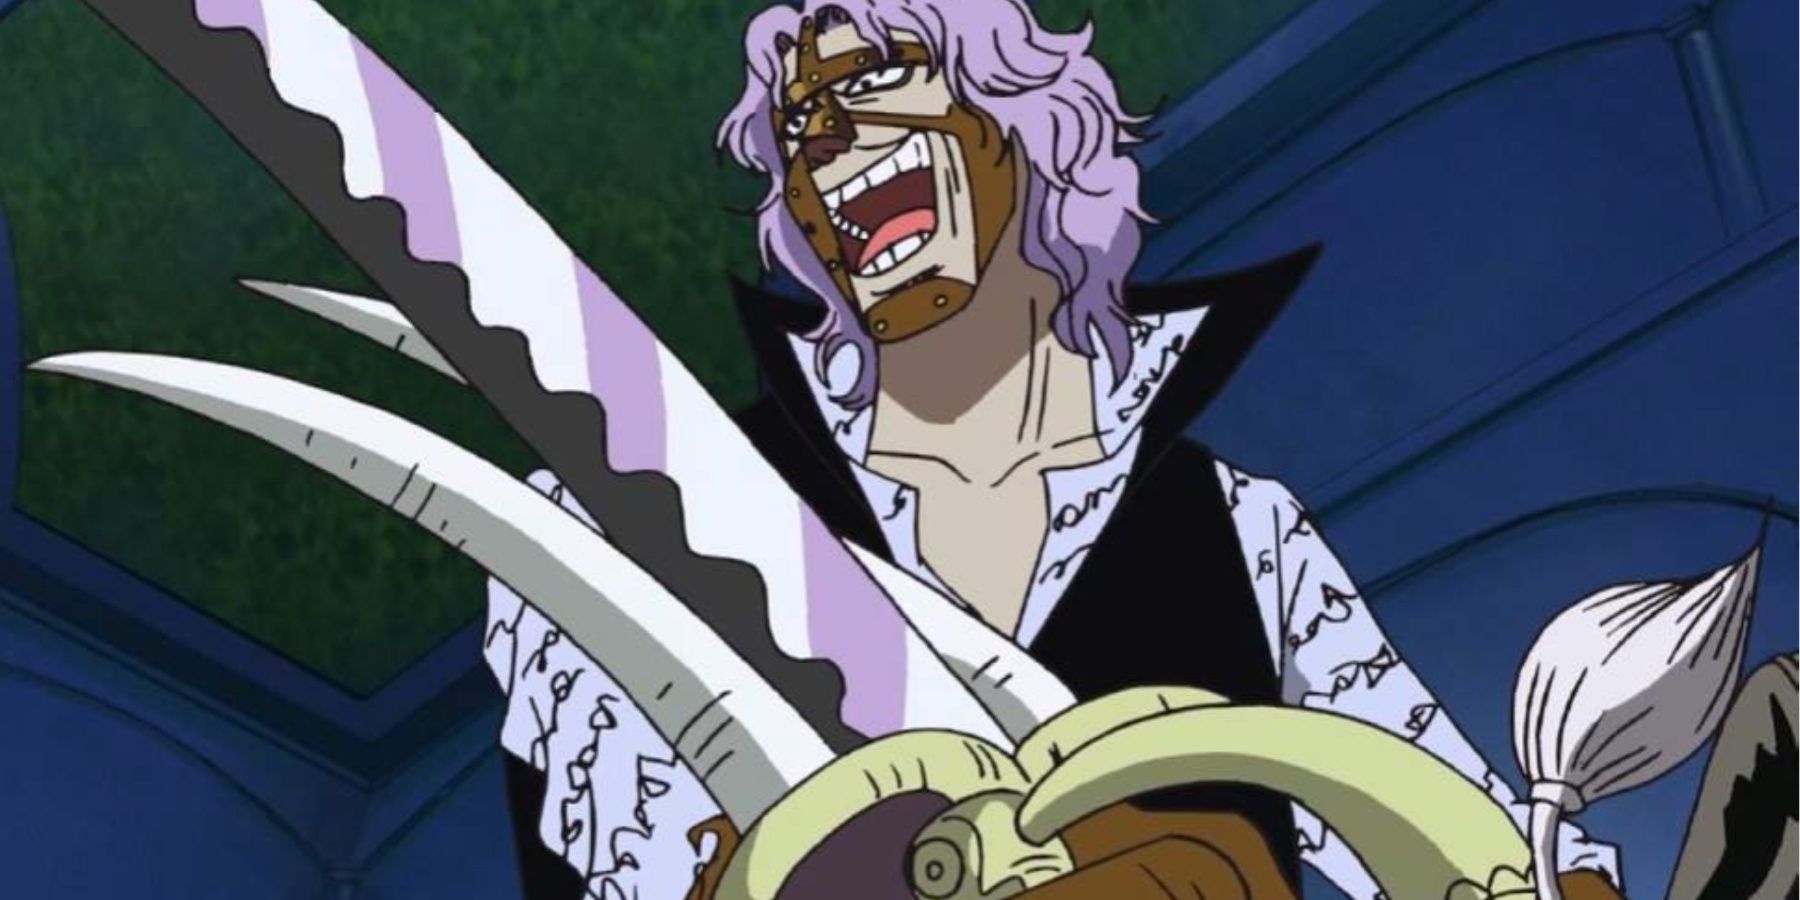 Spandam holding Funkfreed in its sword form in One Piece